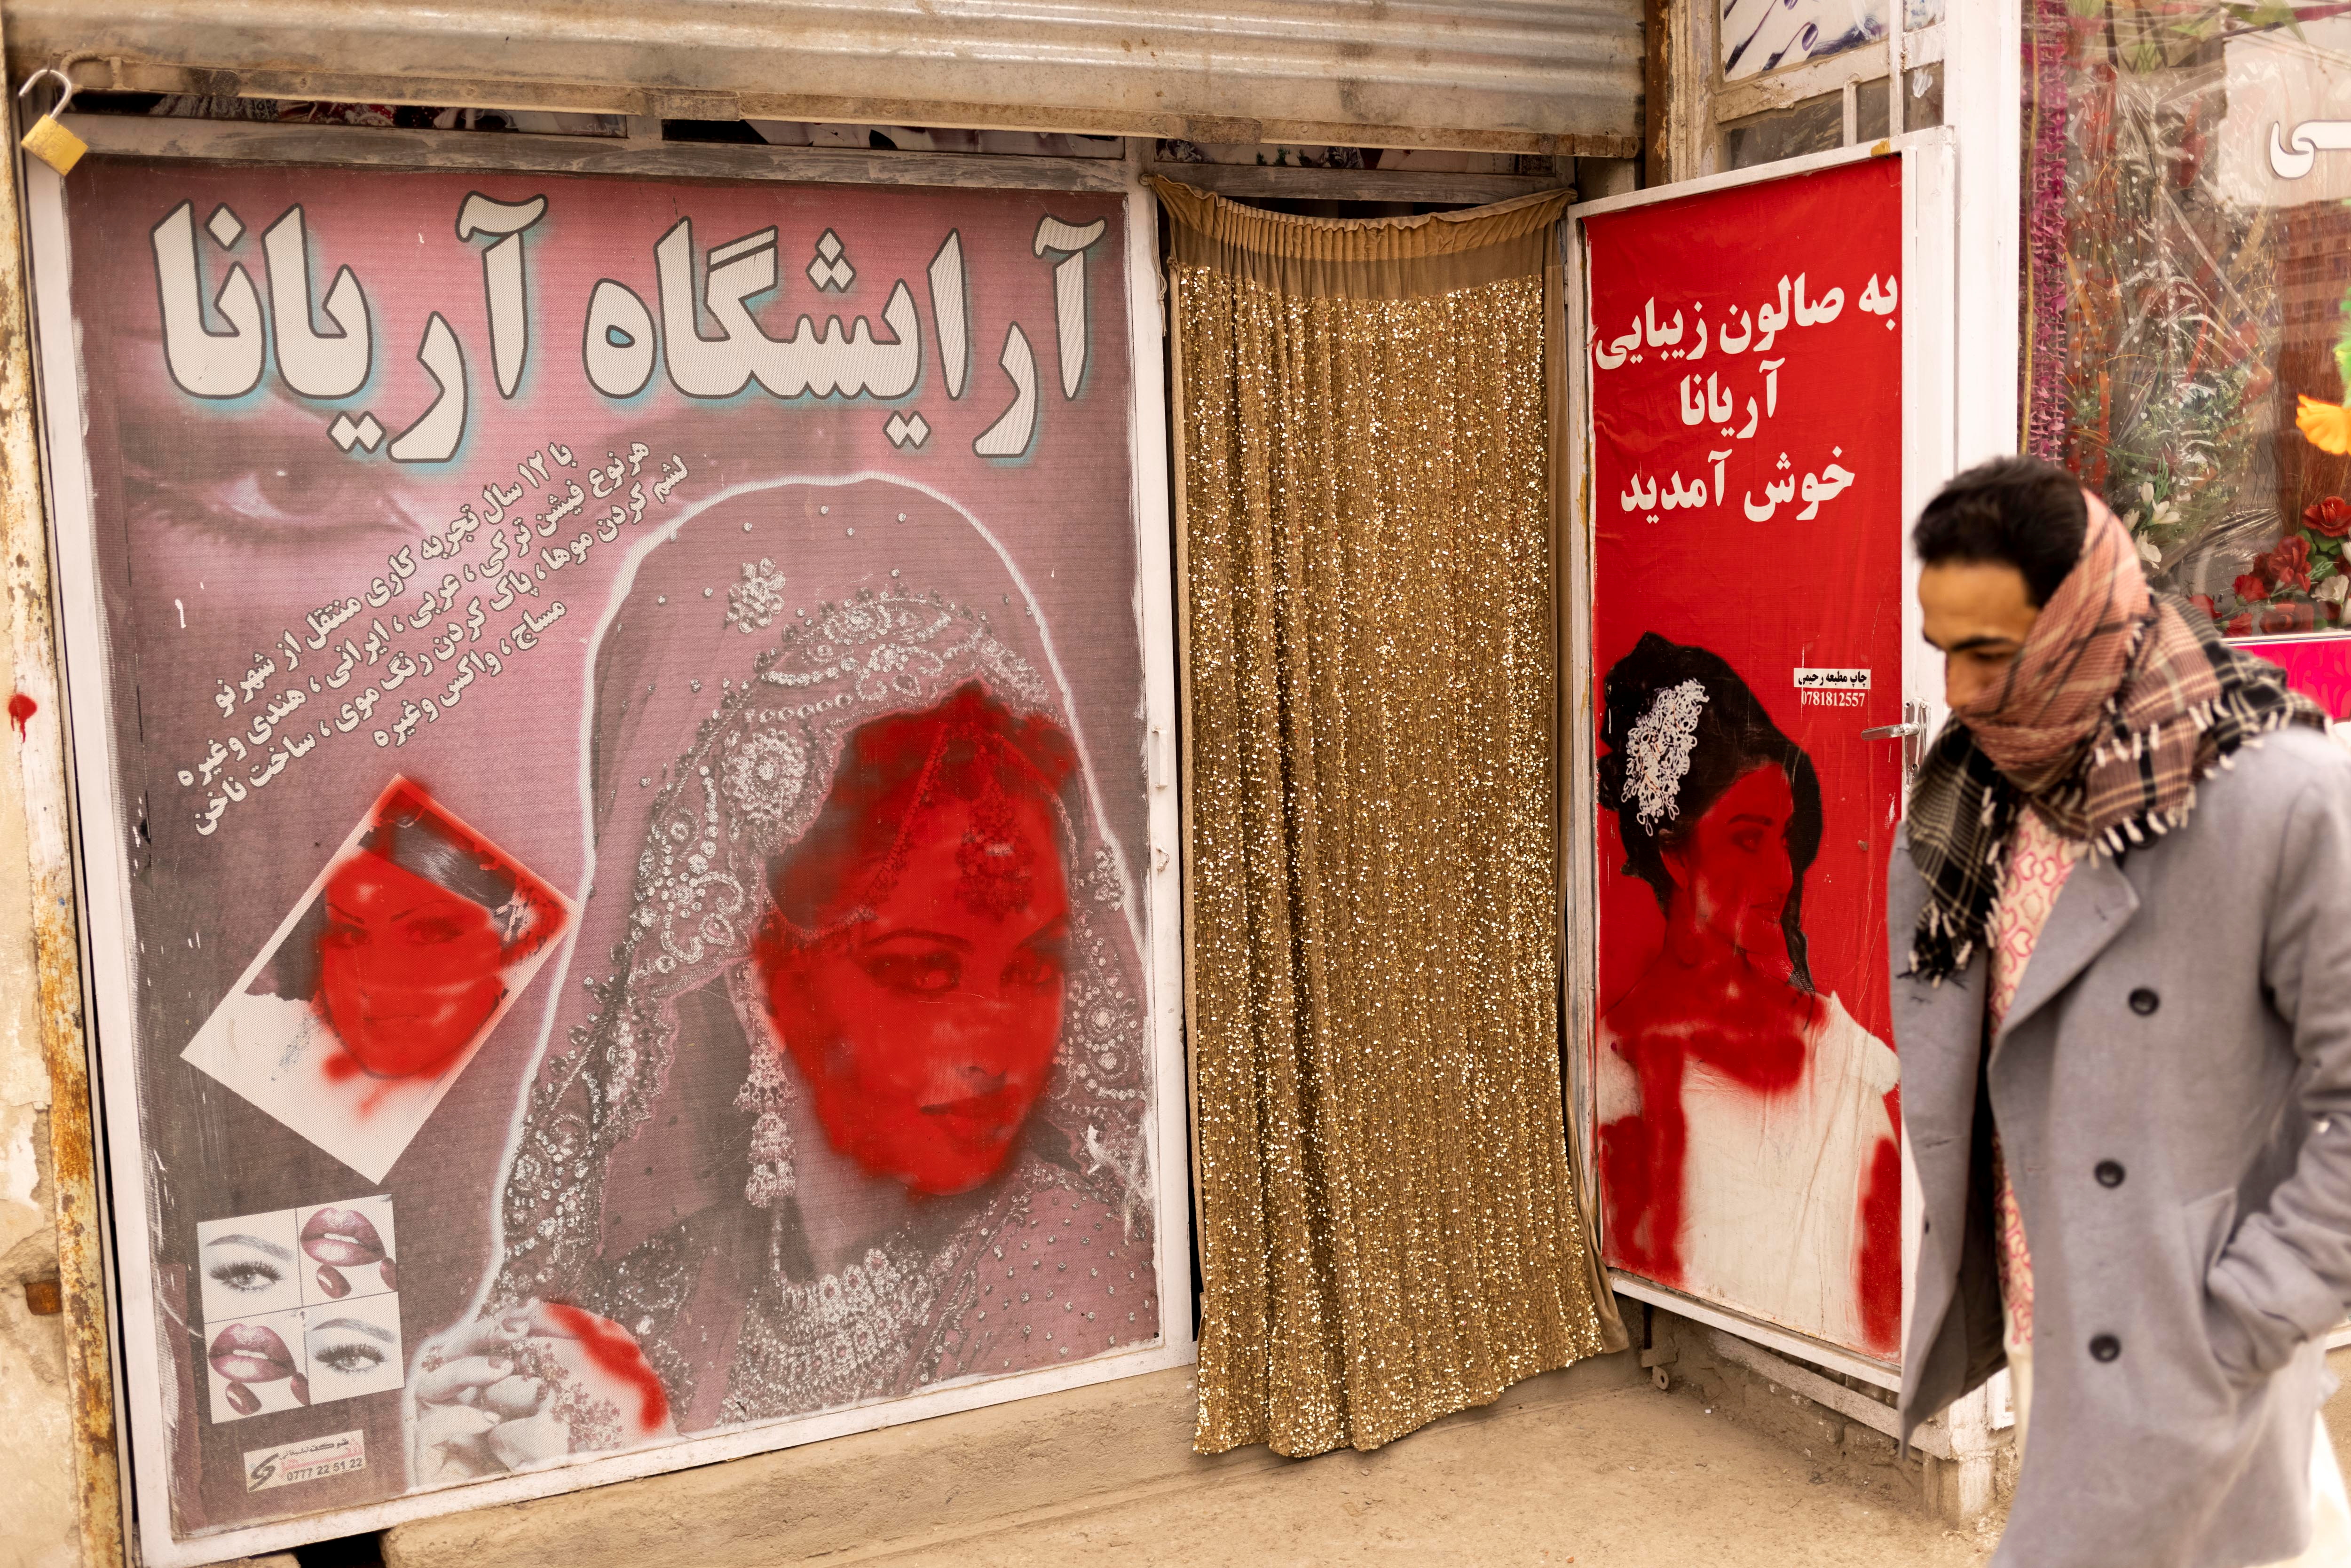 A man walks past a beauty shop with defaced pictures of women in Kabul, Afghanistan October 22, 2021. REUTERS/Jorge Silva